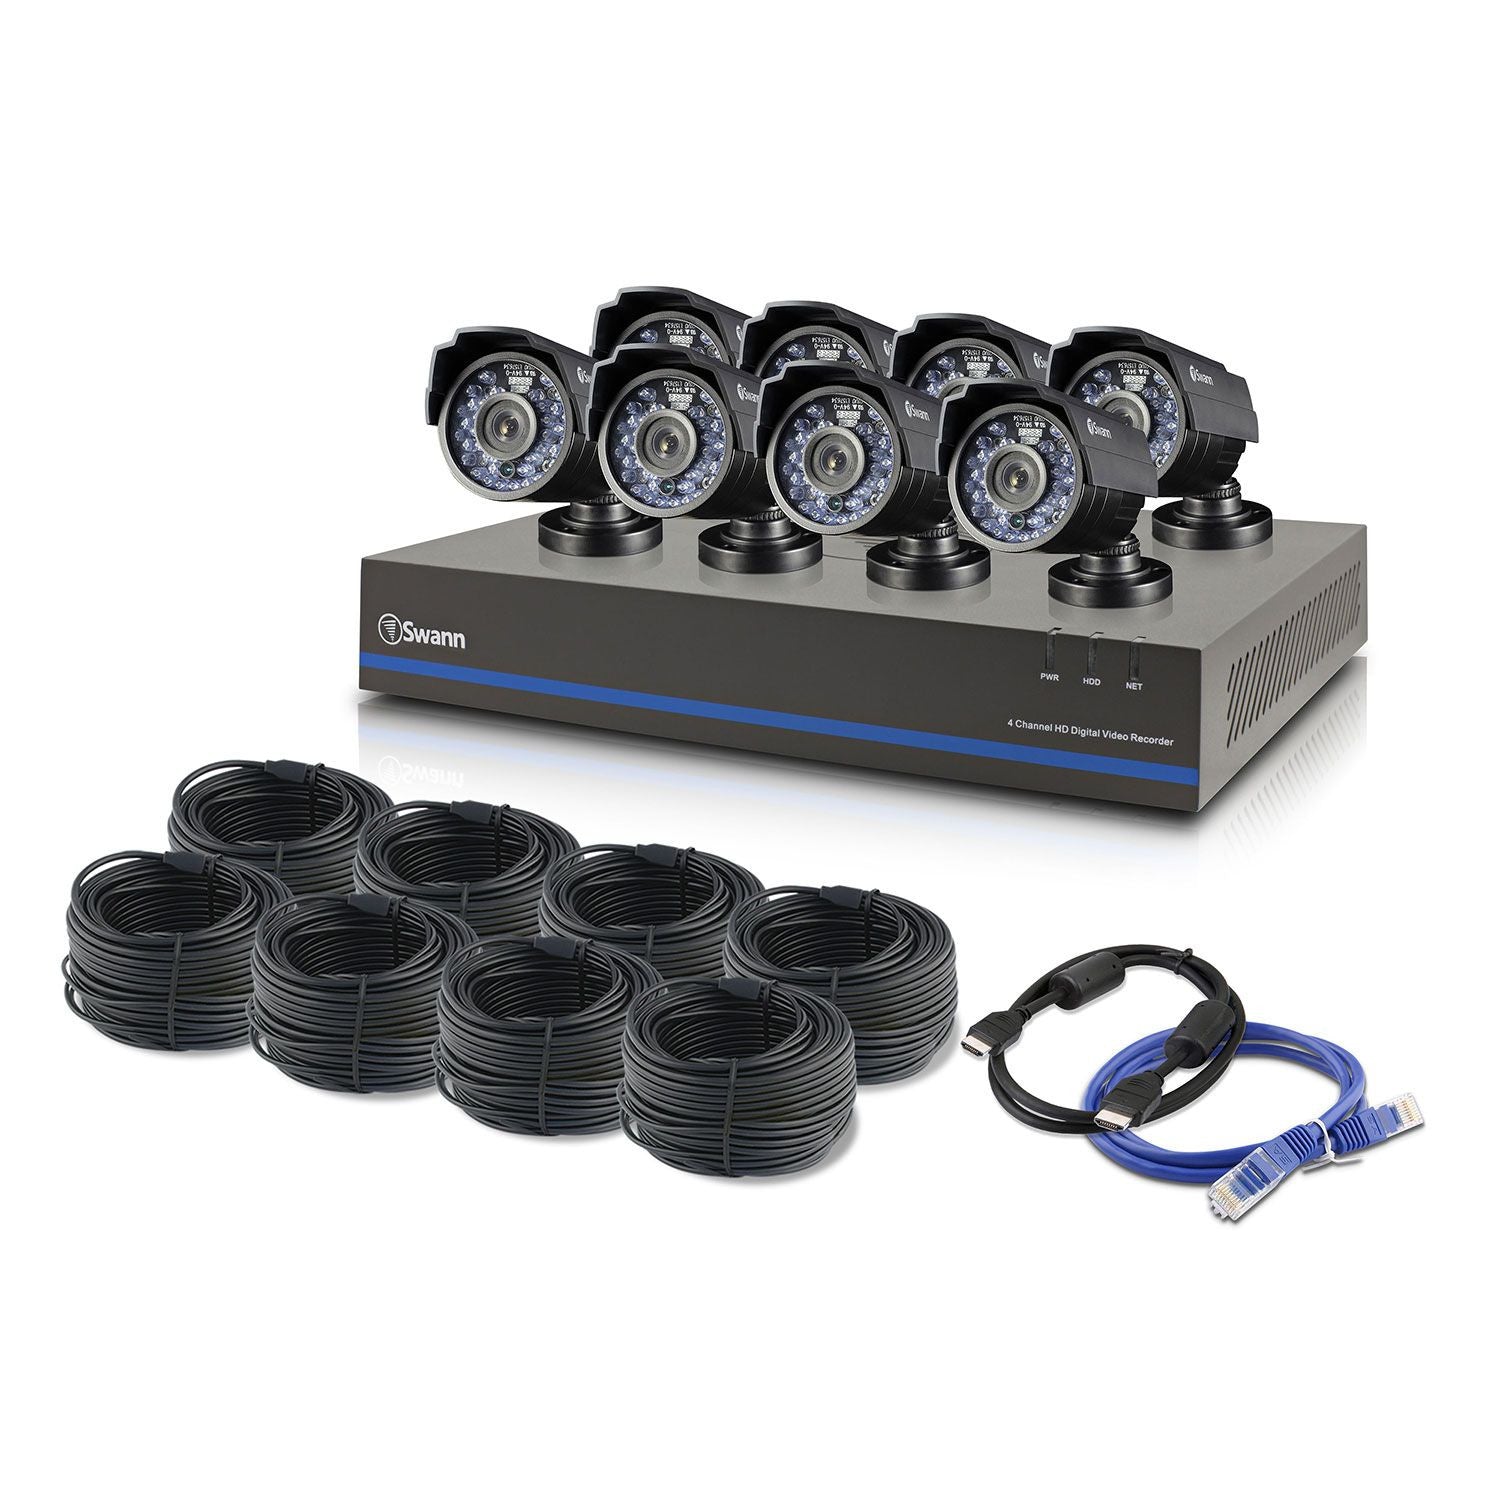 Swann 8 Channel Security System with 1TB Hard Drive, 8 1MP Cameras, 720P SDI DVR, and 82' Night Vision - worldtradesolution.com
 - 6